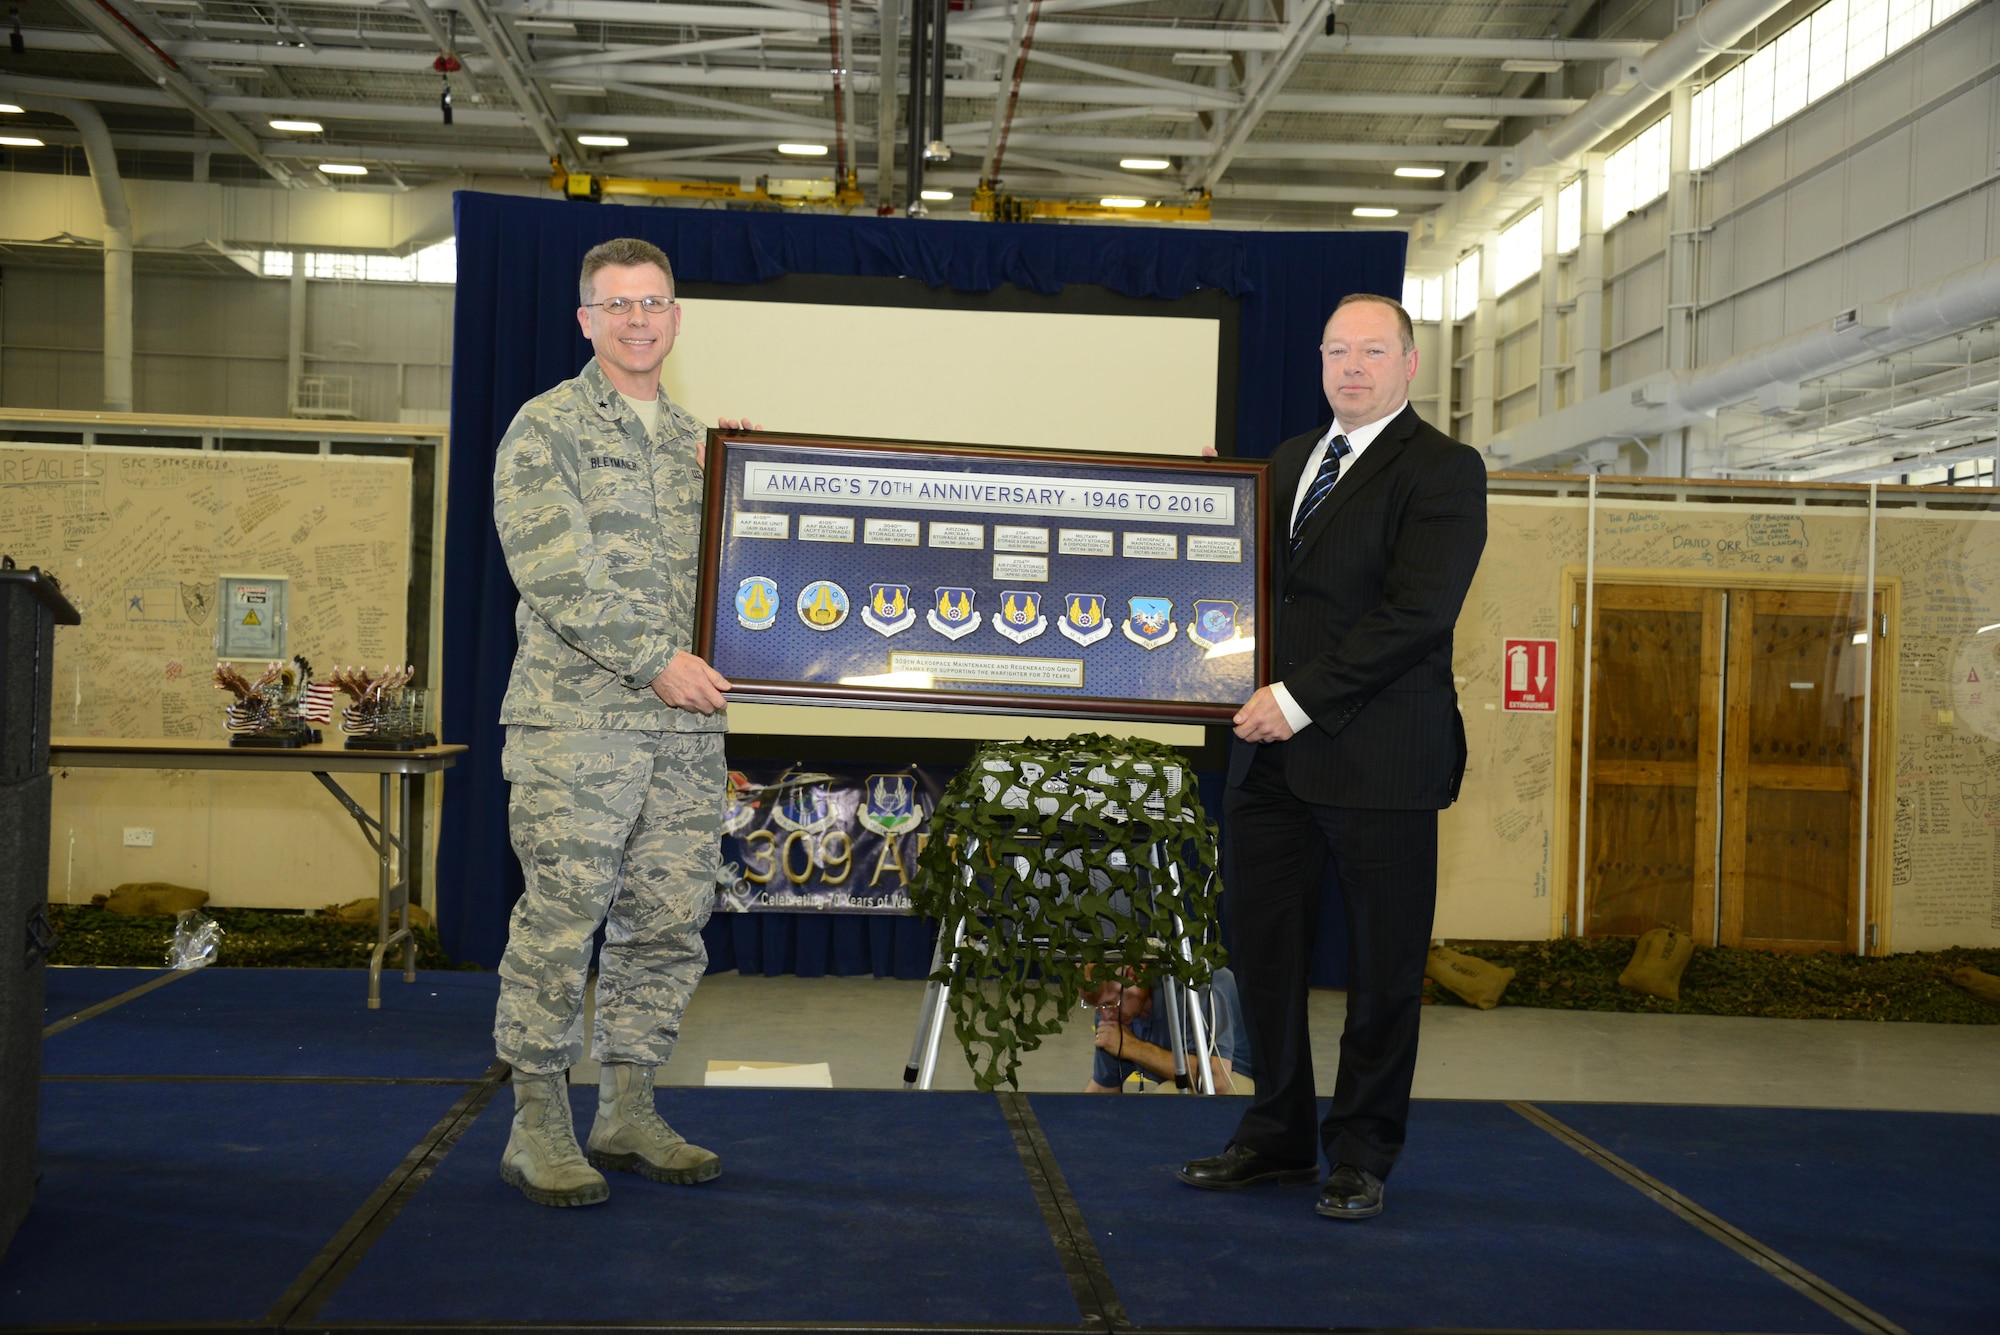 U.S. Air Force Brig. Gen. Steven J. Bleymaier, Commander of Ogden Air Logistics Complex at Hill Air Force Base, Utah, presents a commemorative plaque to Tim Gray, 309th Aerospace Maintenance and Regeneration Group deputy director, during the 70th Anniversary Celebration of the 309th AMARG at Davis-Monthan Air Force Base, Ariz., April 4, 2016.  Although the name has changed over the years the organization has continued achieving its mission elements: aircraft storage and preservation, reclaiming and returning vital parts into the supply chain, regenerating valuable aircraft to flying service and providing limited depot maintenance and modifications.  (U.S. Air Force Photo by Senior Airman Chris Massey/Released)